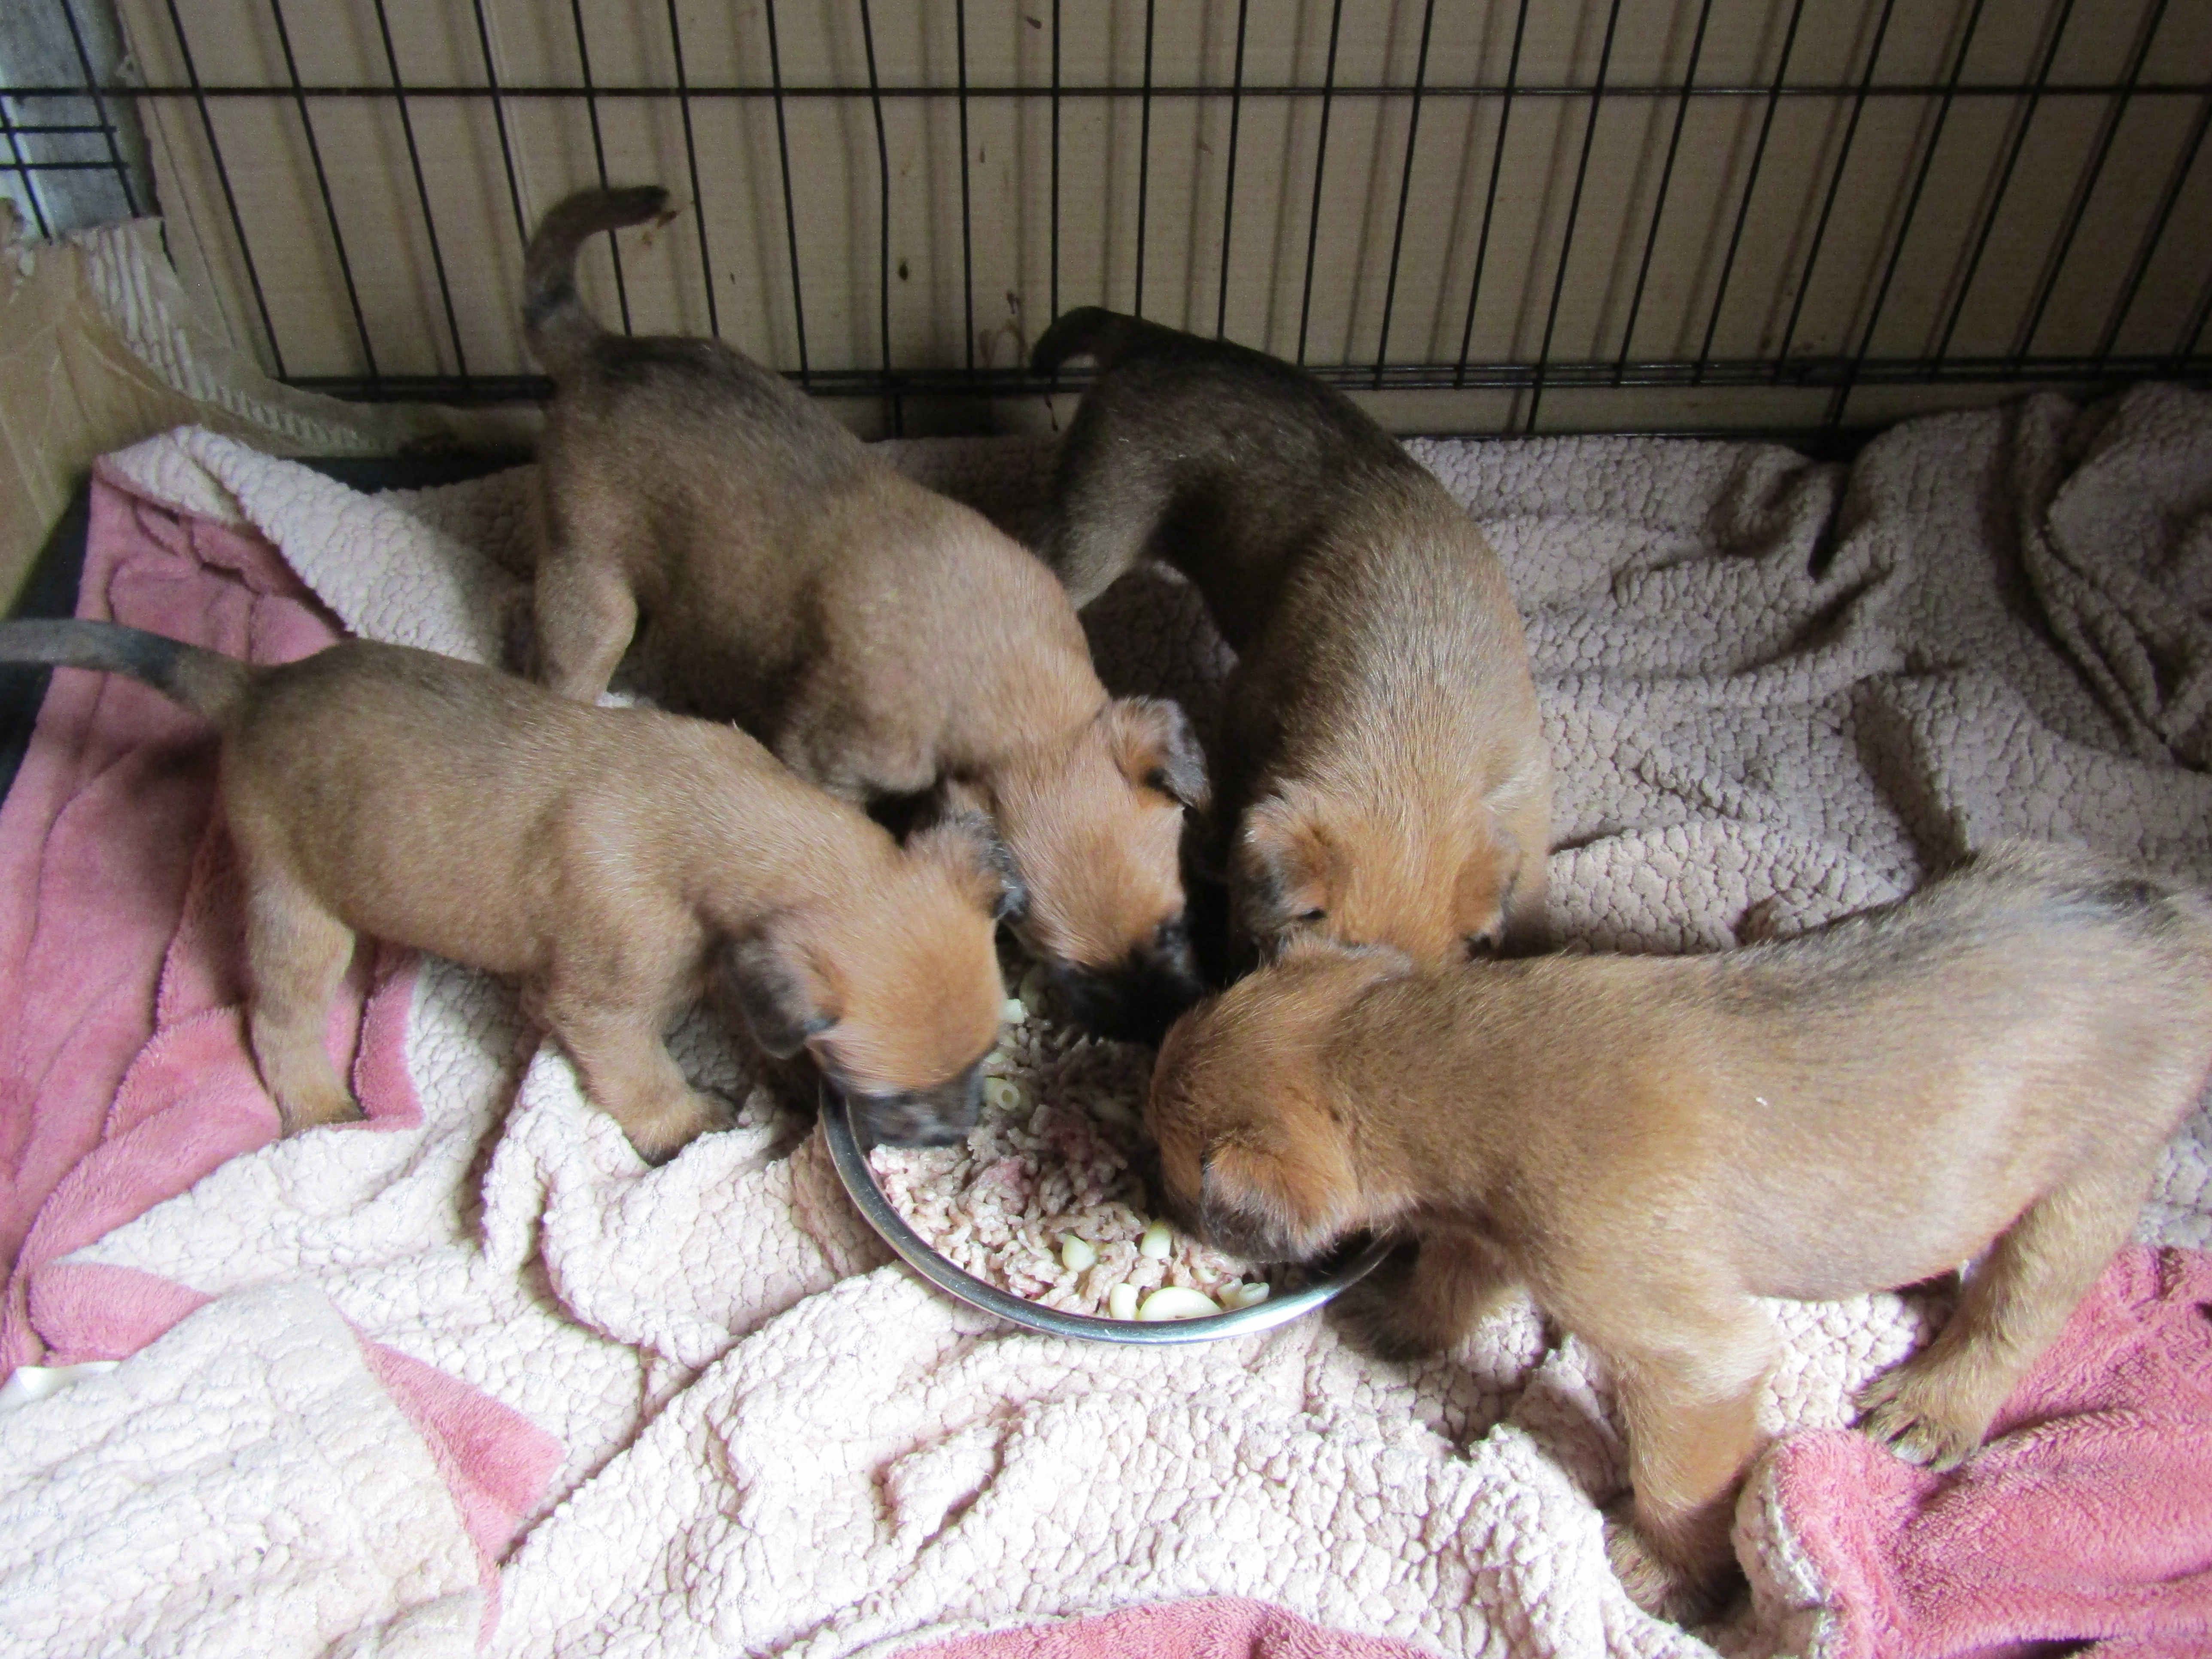 Pups having a solid meal